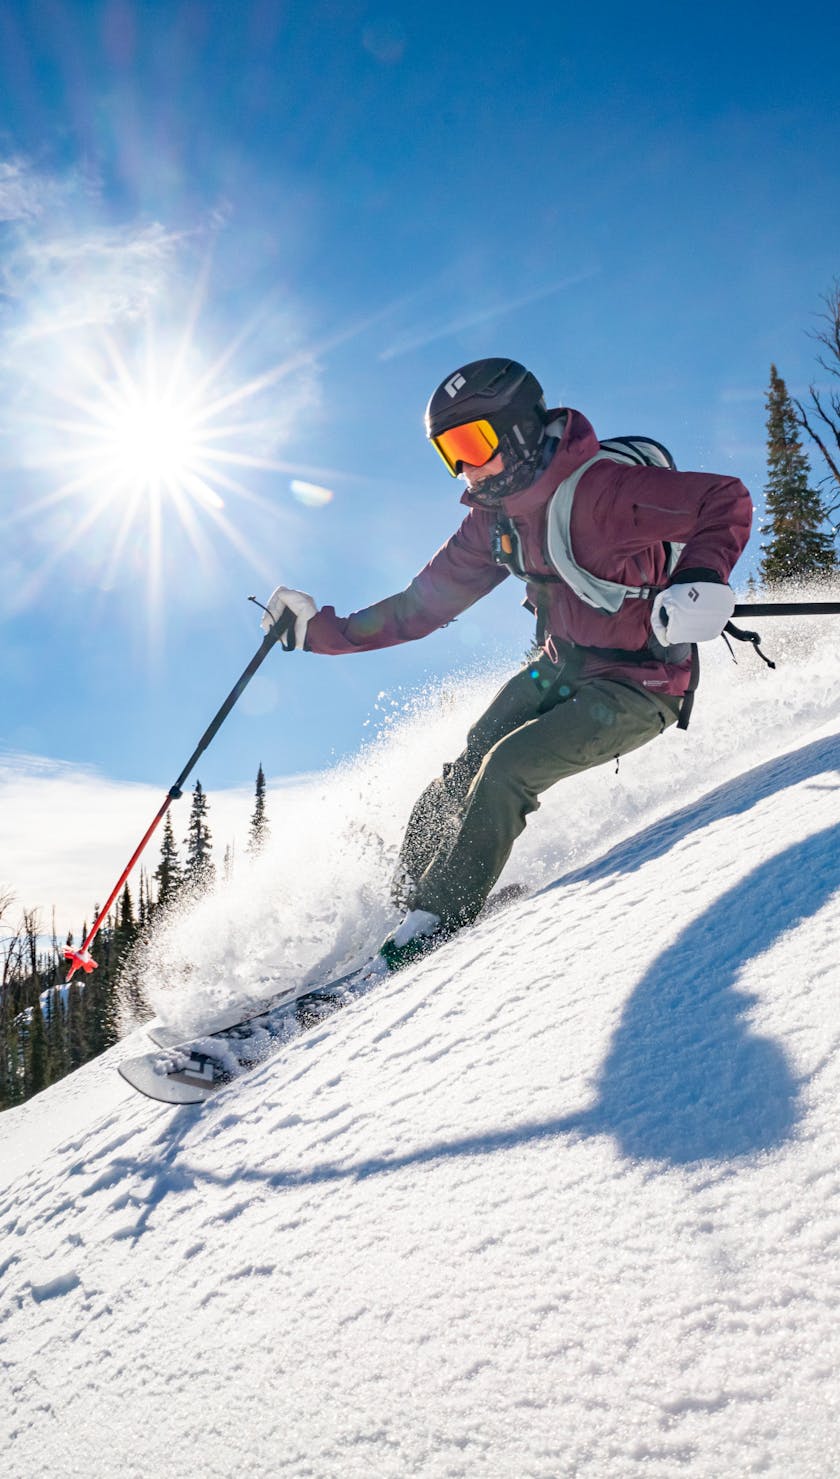 Spring Ski Sale ID. A backcountry skier enjoys spring skiing conditions. 